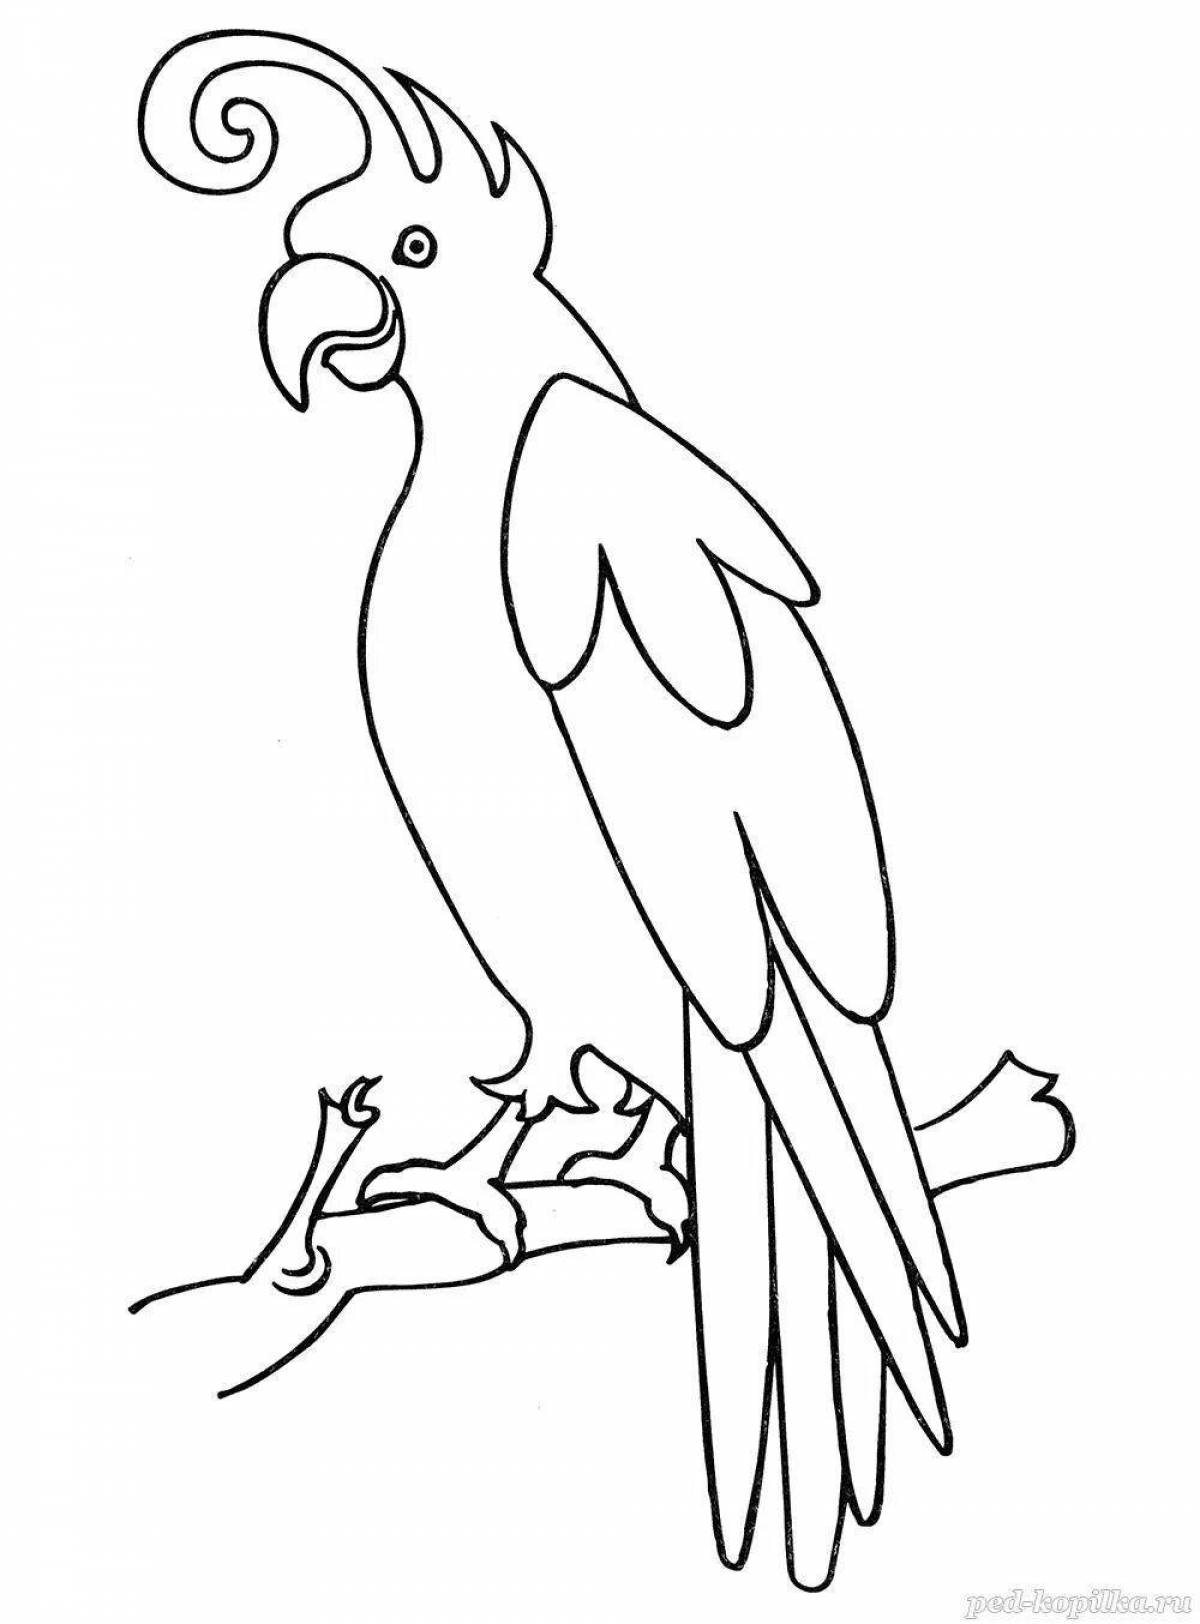 Adorable macaw parrot coloring book for kids